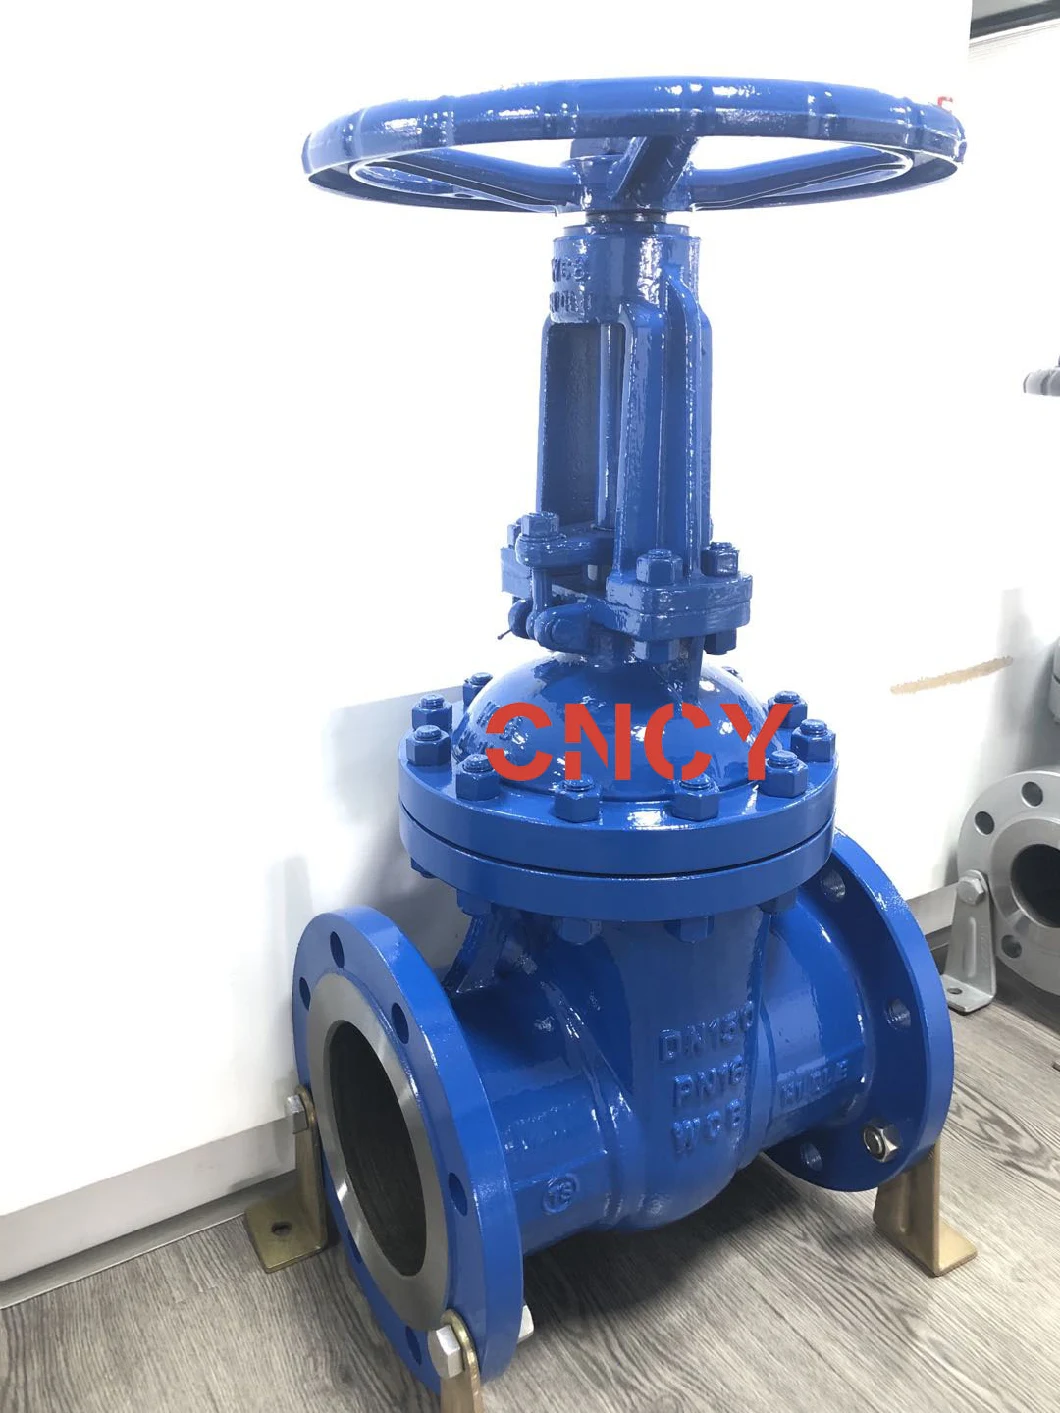 DIN Carbon Steel Wcb Gear Operation with ISO Plate Wedge out Side Gate Valve Manufacturer